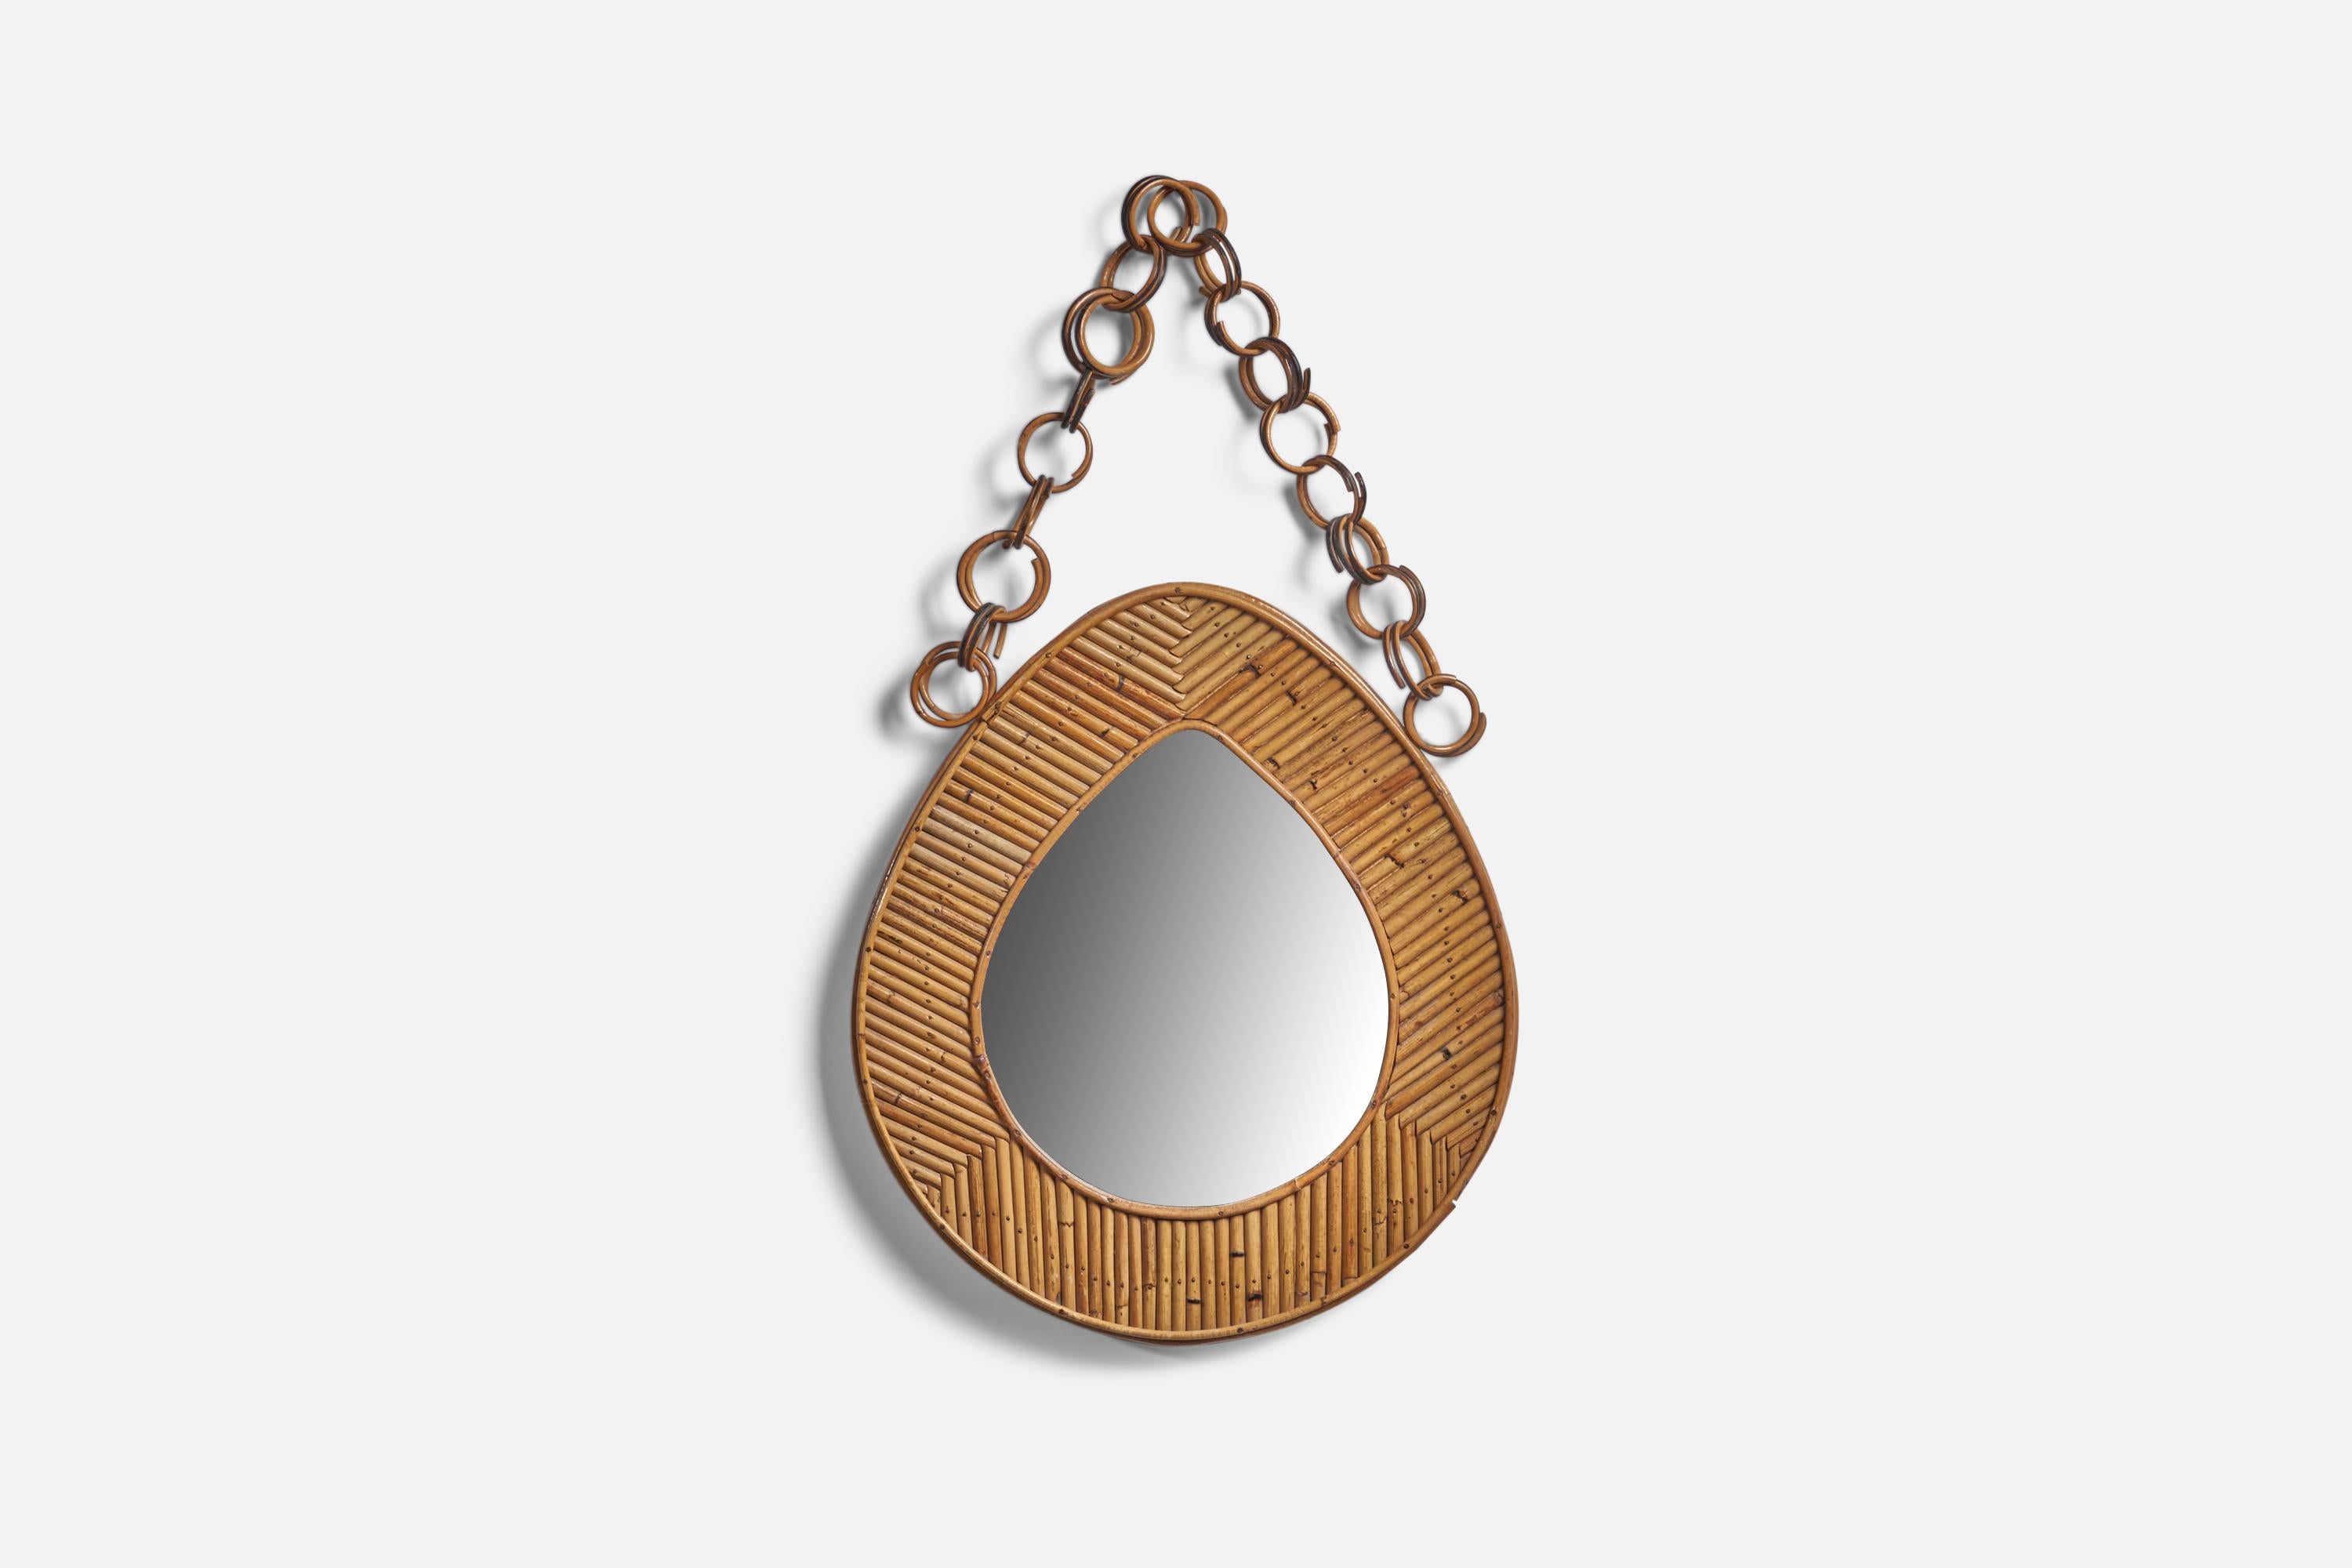 A bamboo wall mirror designed and produced in Italy c. 1950s.
Chain adds 9